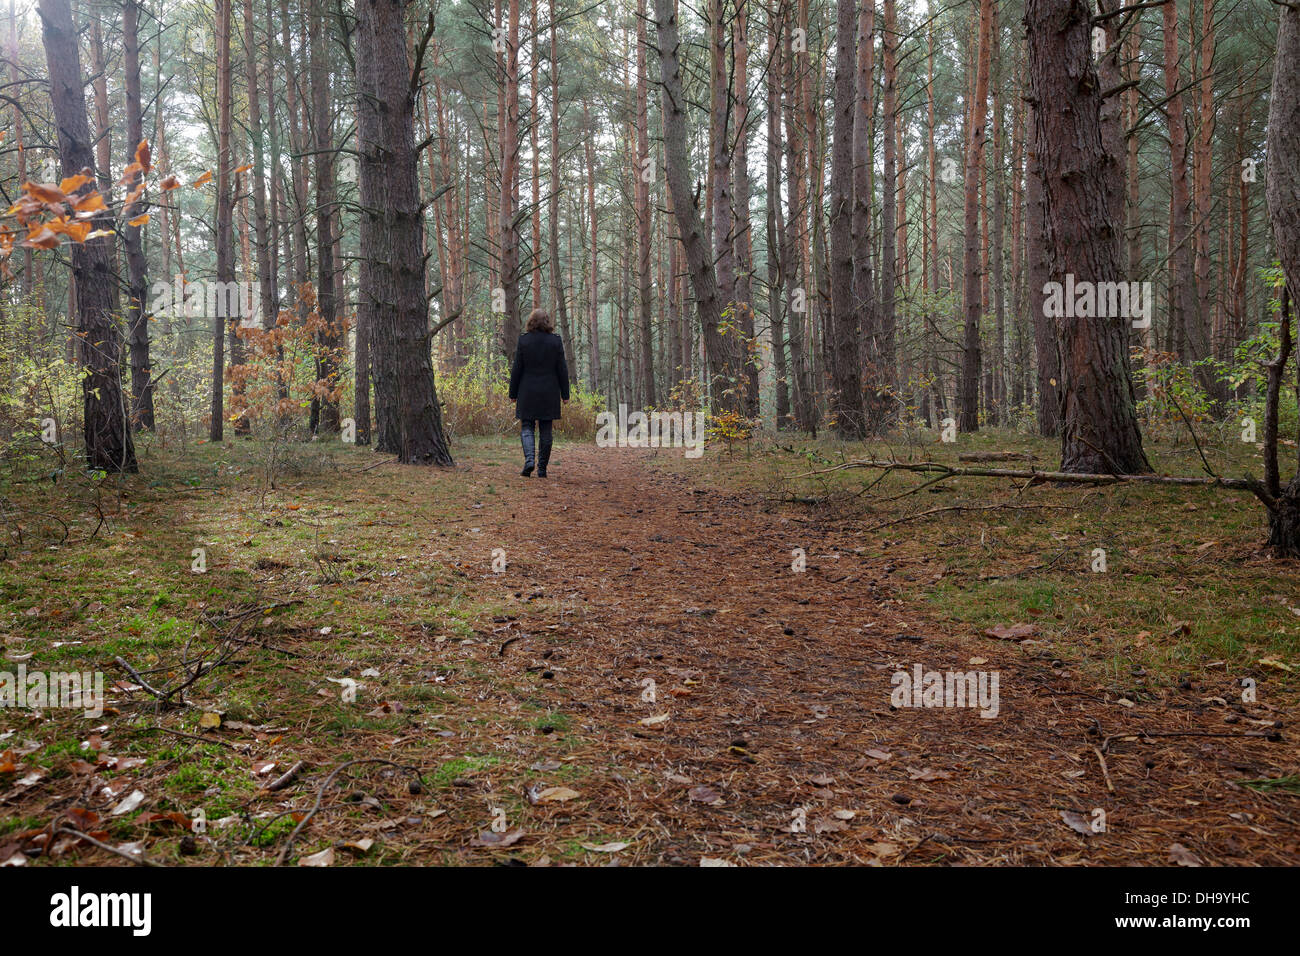 Woman walking alone in a forest Stock Photo